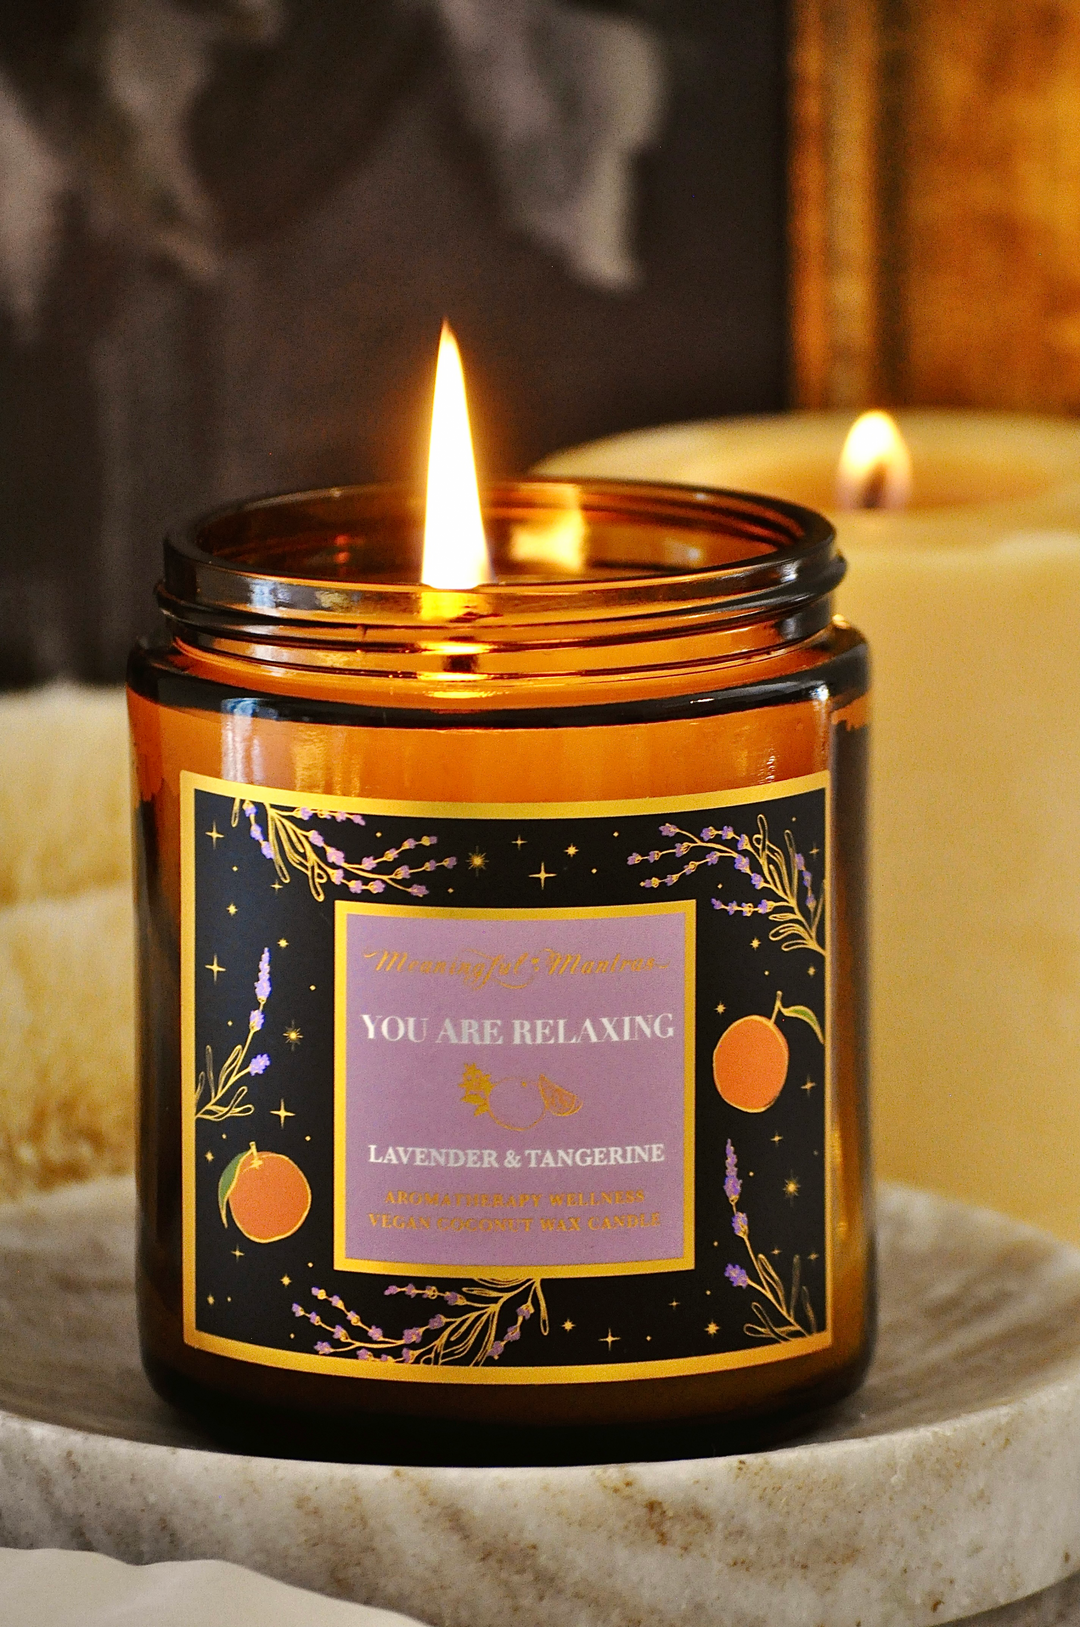 You Are Relaxing Lavender & Tangerine 8oz Candle